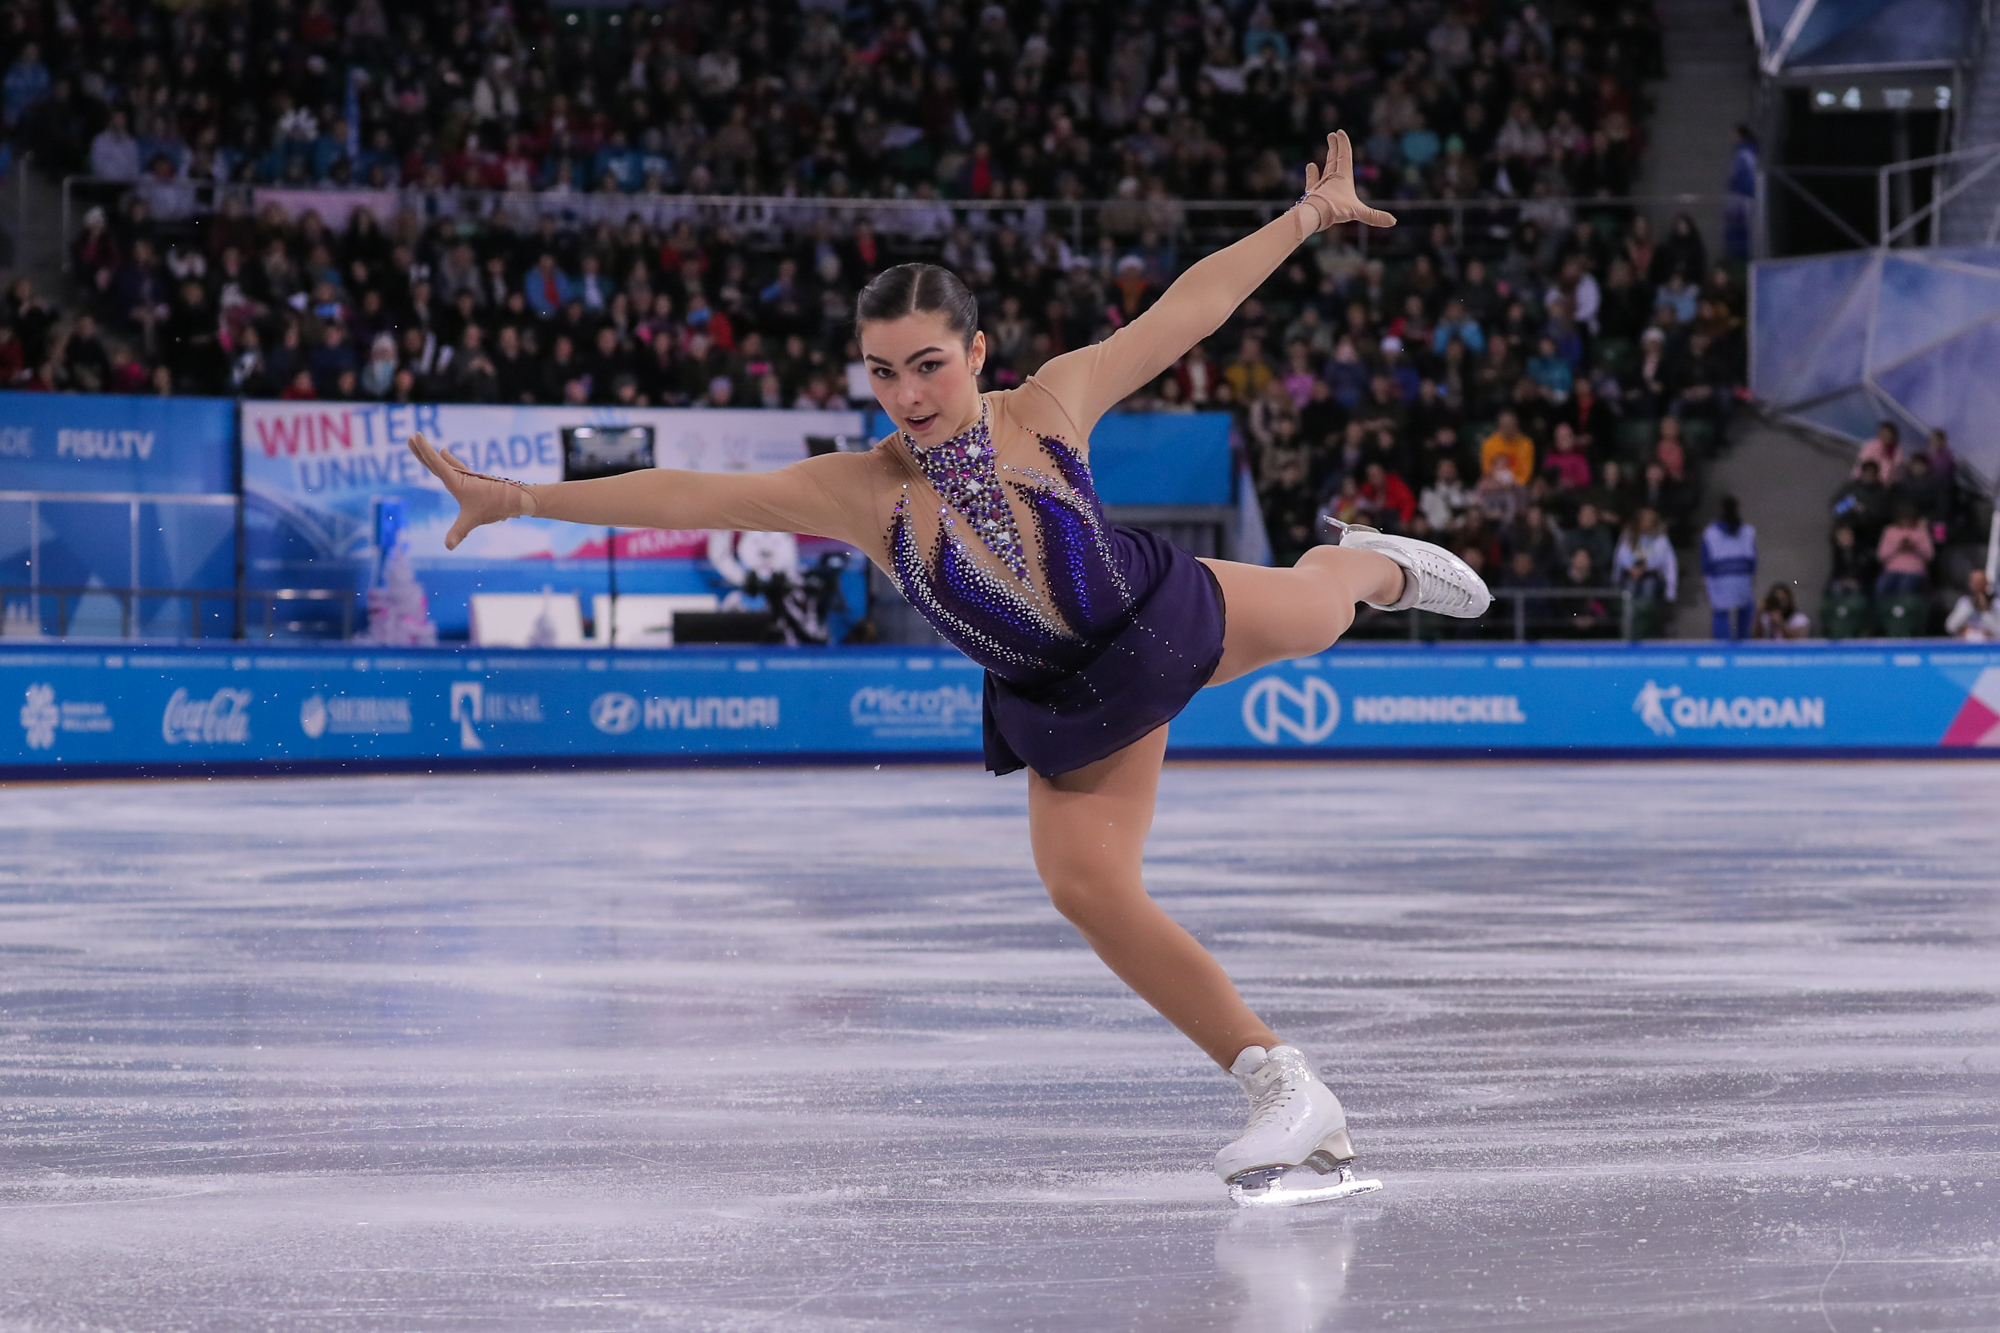 Poise and precision were the order of the day as the women's figure skating competition concluded ©Krasnoyarsk 2019